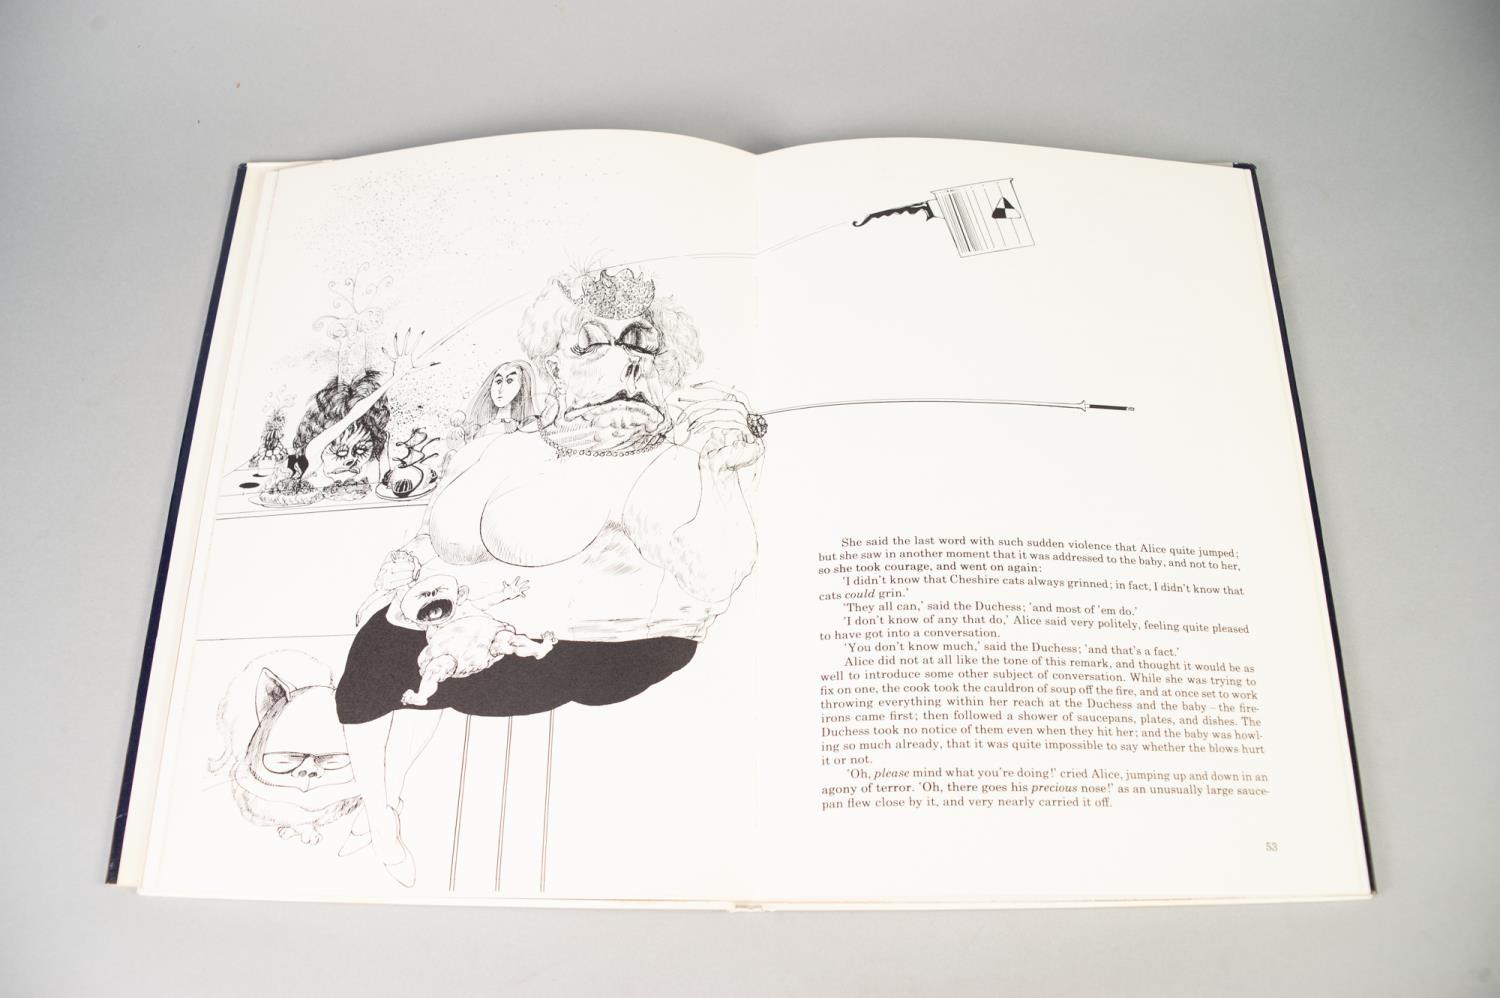 LEWIS CARROLL ALICE IN WONDERLAND, illustrated by Ralph Steadman, published Dennis Dobson, London - Image 8 of 8